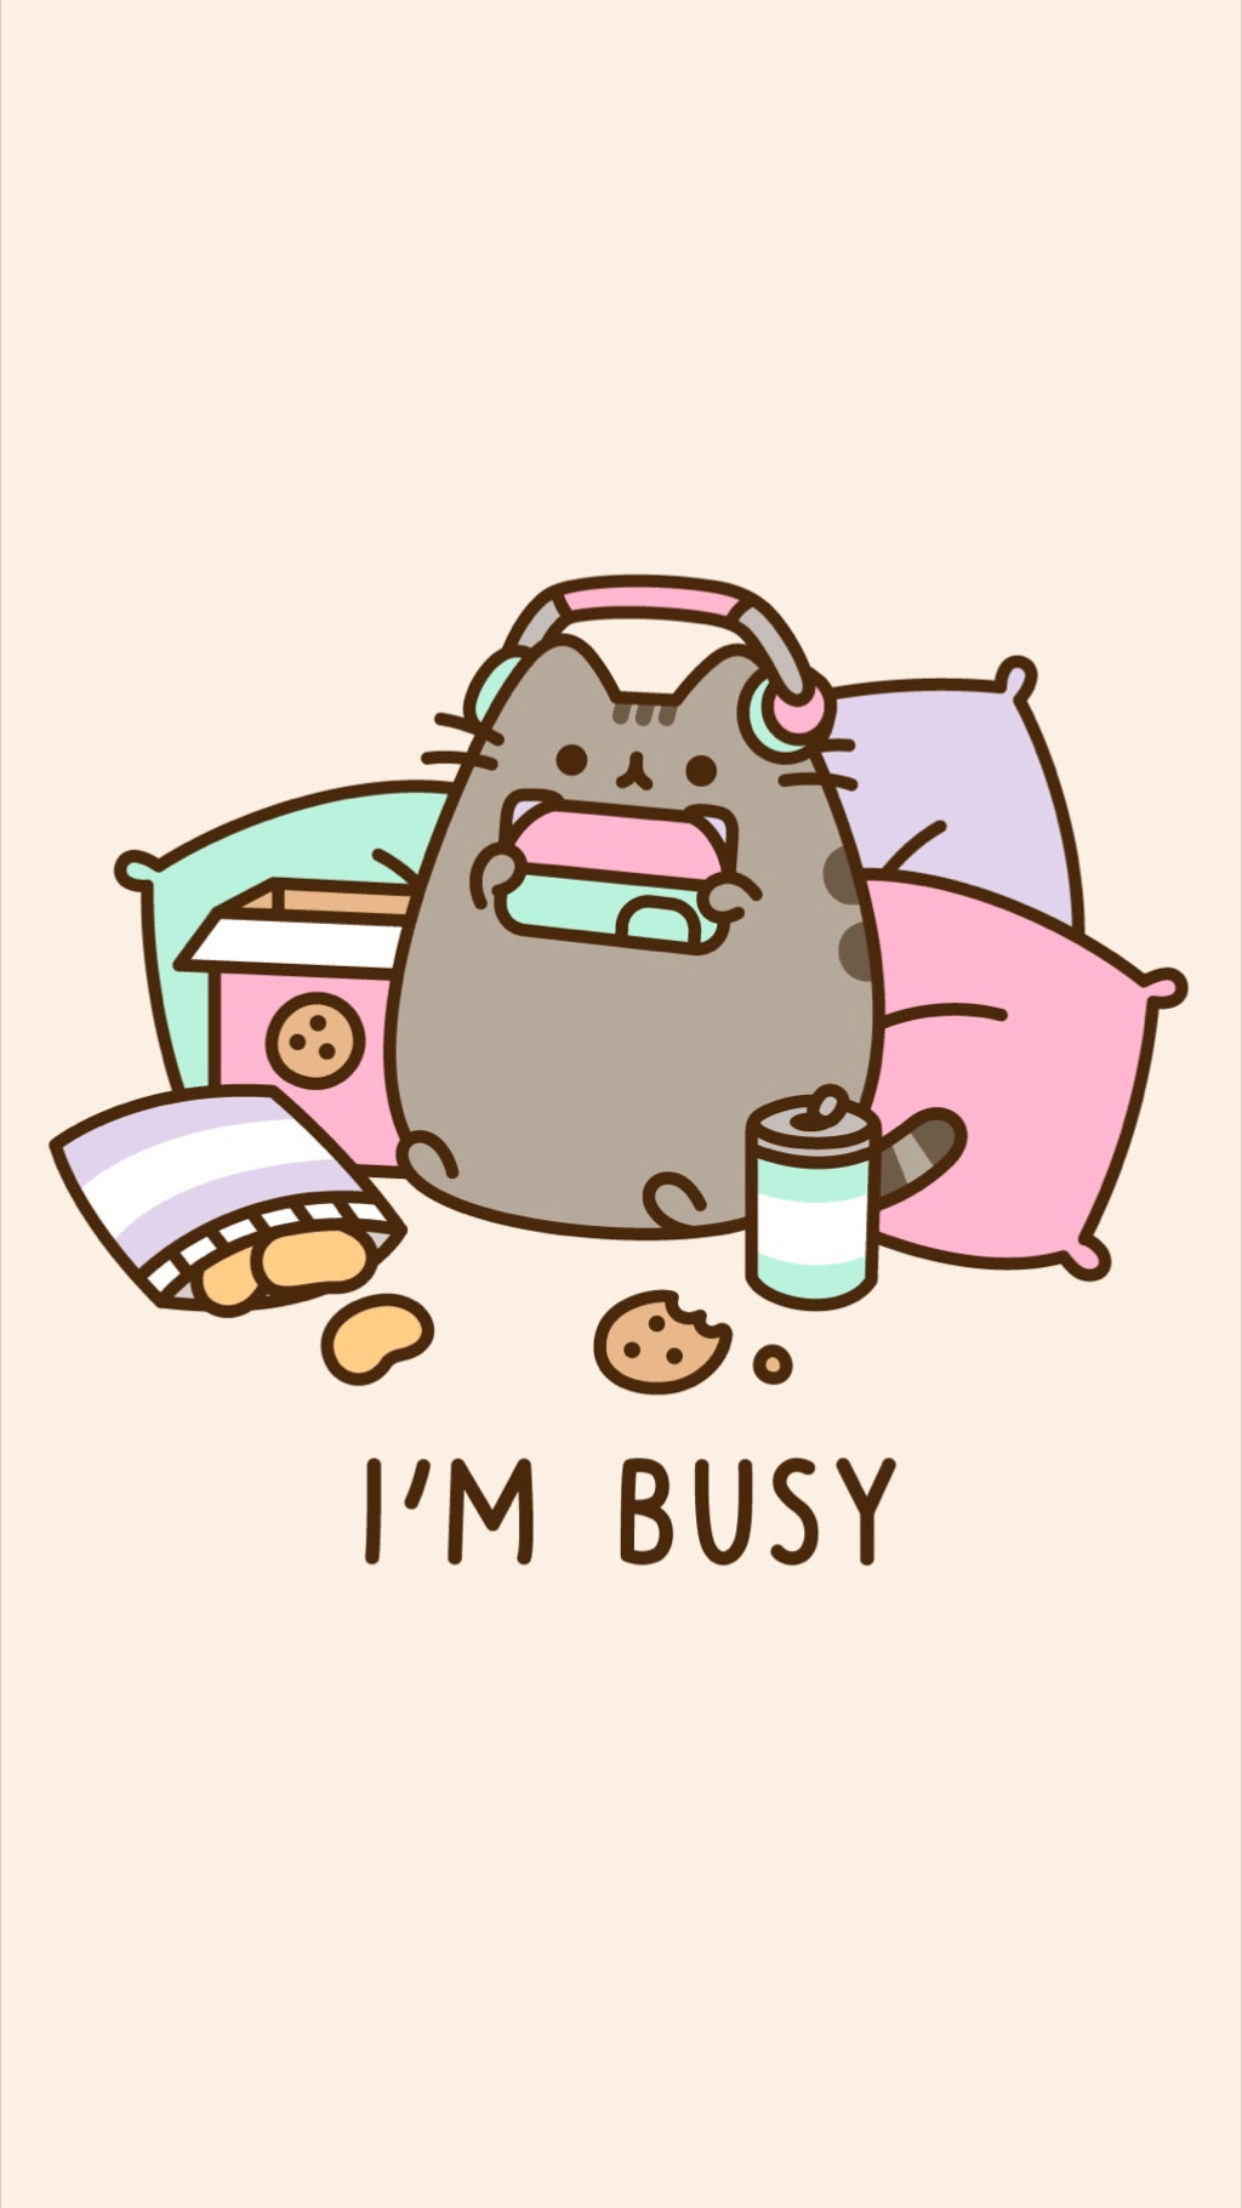 Don't bother me, I'm busy. Lol. Pusheen is so cute. Me